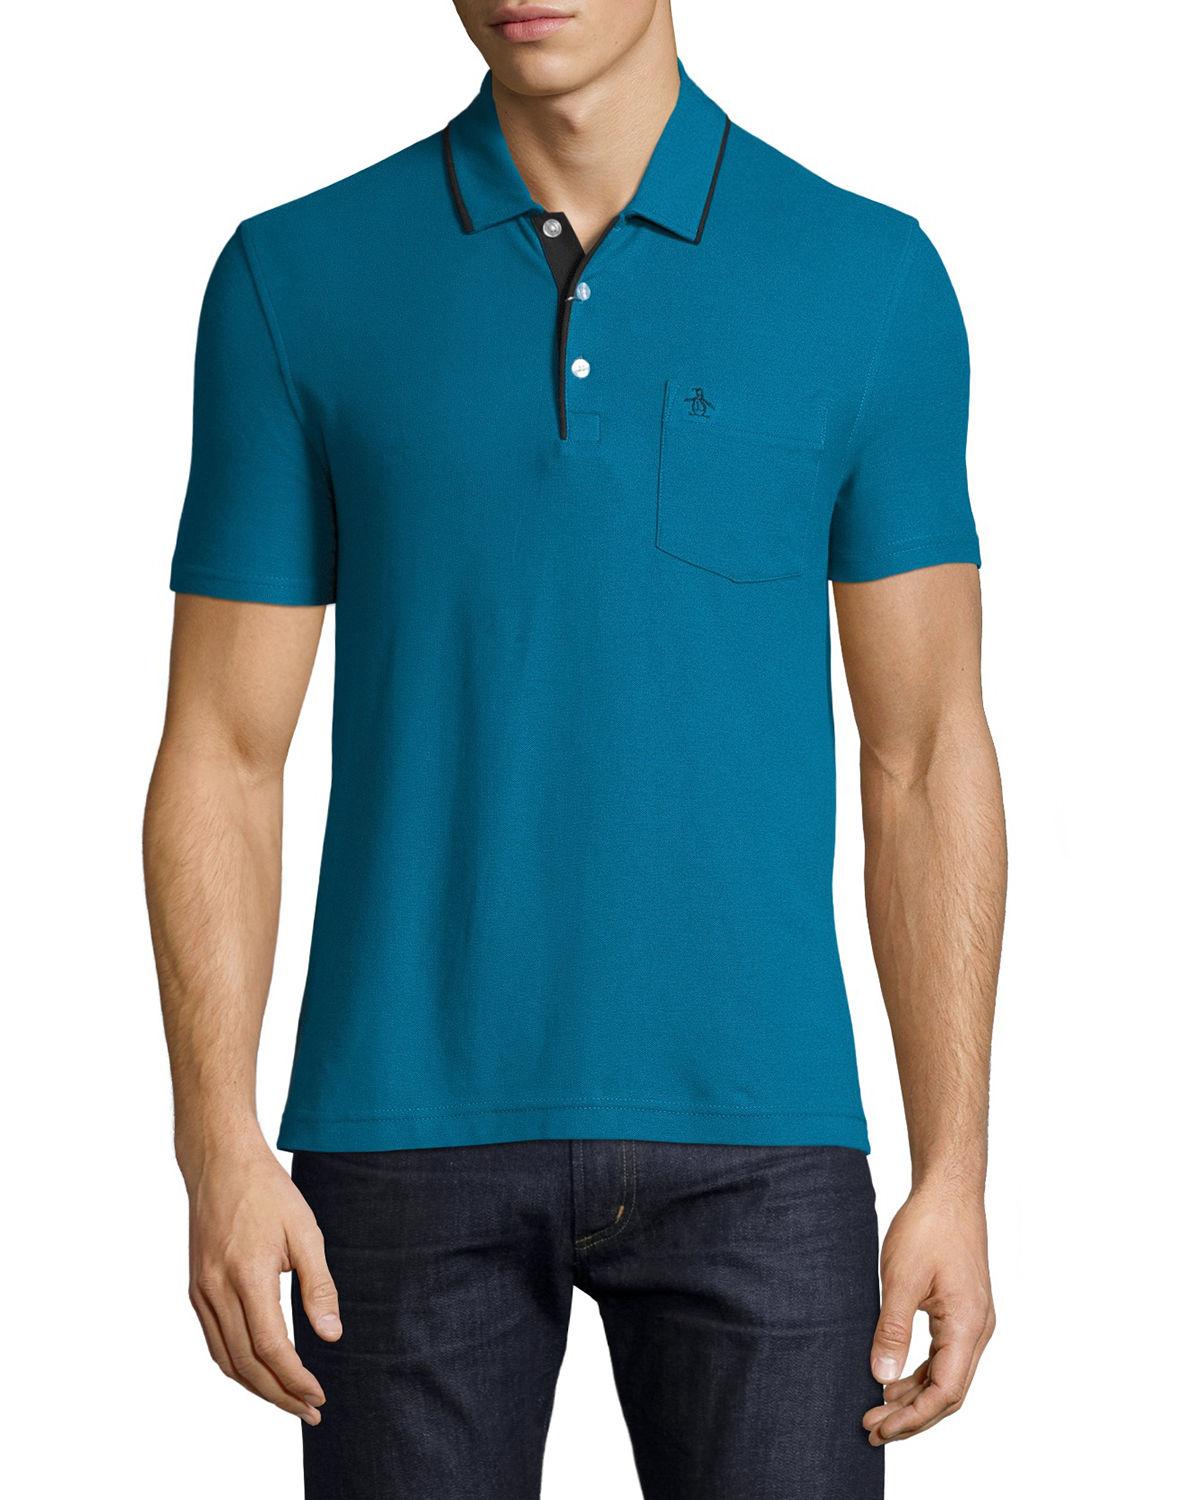 Lyst - Original Penguin Classic Tipped Polo Shirt in Blue for Men